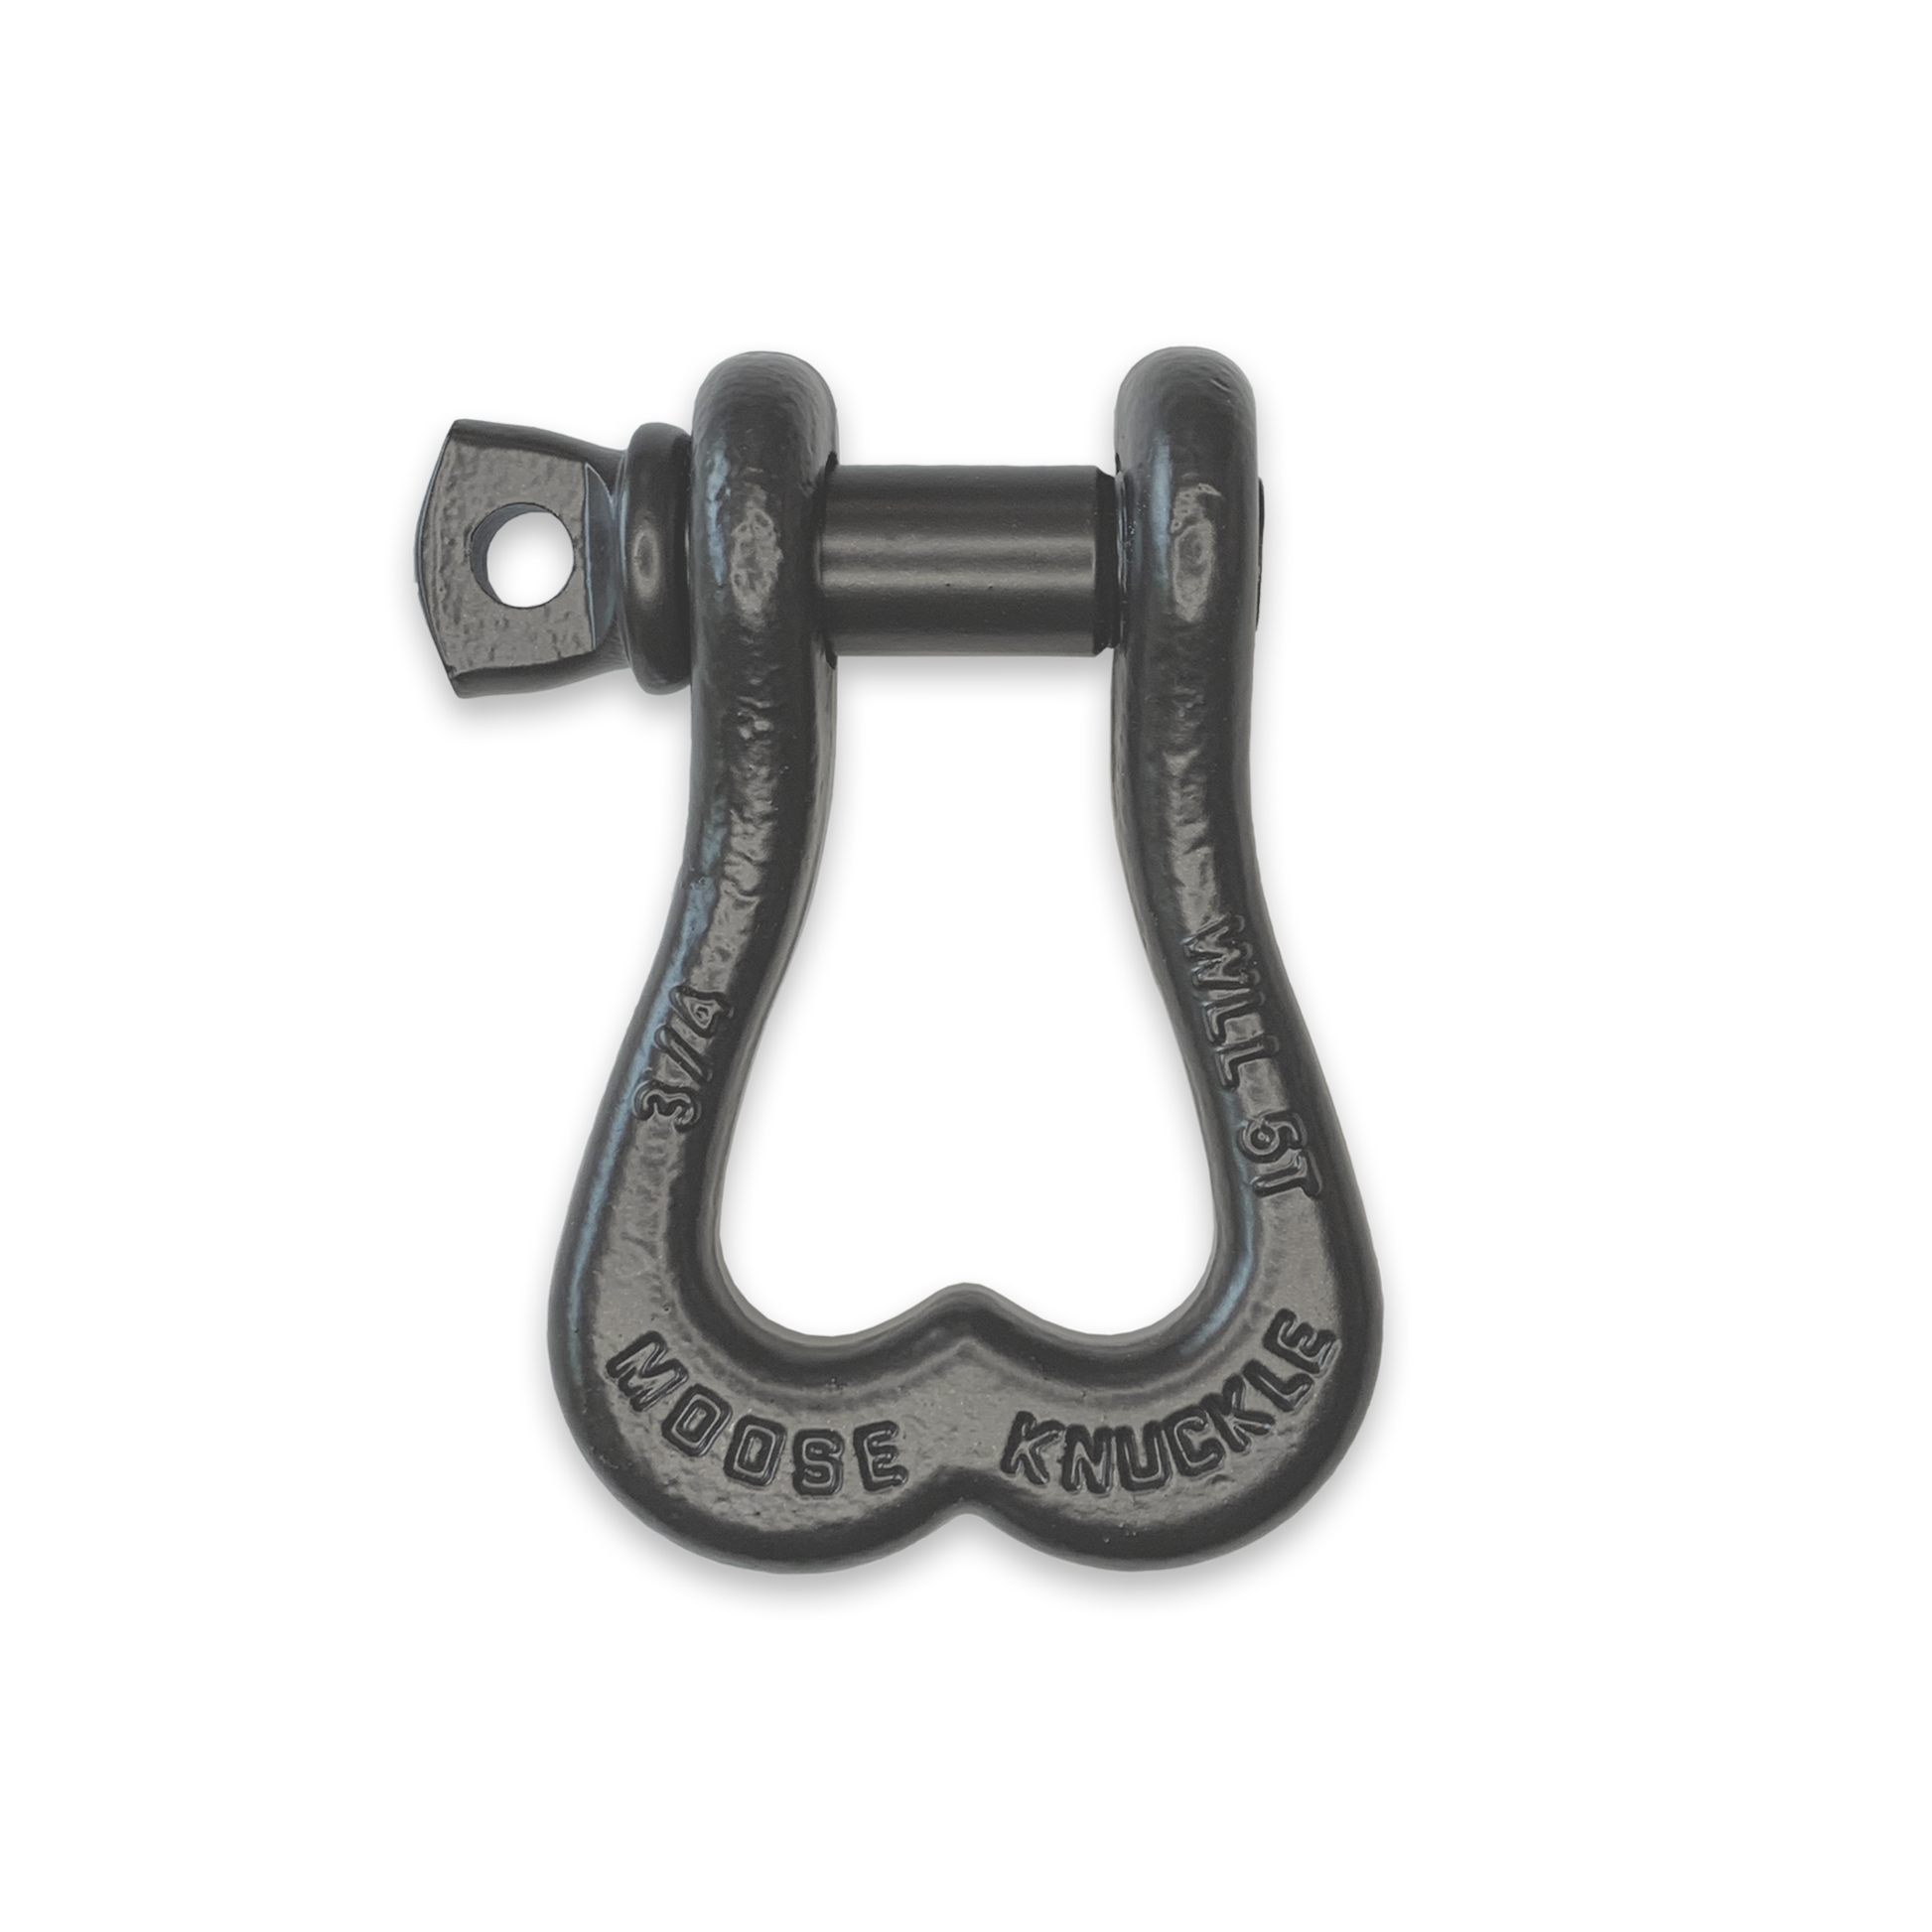 Moose Knuckle XL Gun Gray D-Ring 3/4" Shackle for Towing Off-Road Jeep, Tacoma, 4-Runner, 4x4 Truck and SxS Vehicle Recovery